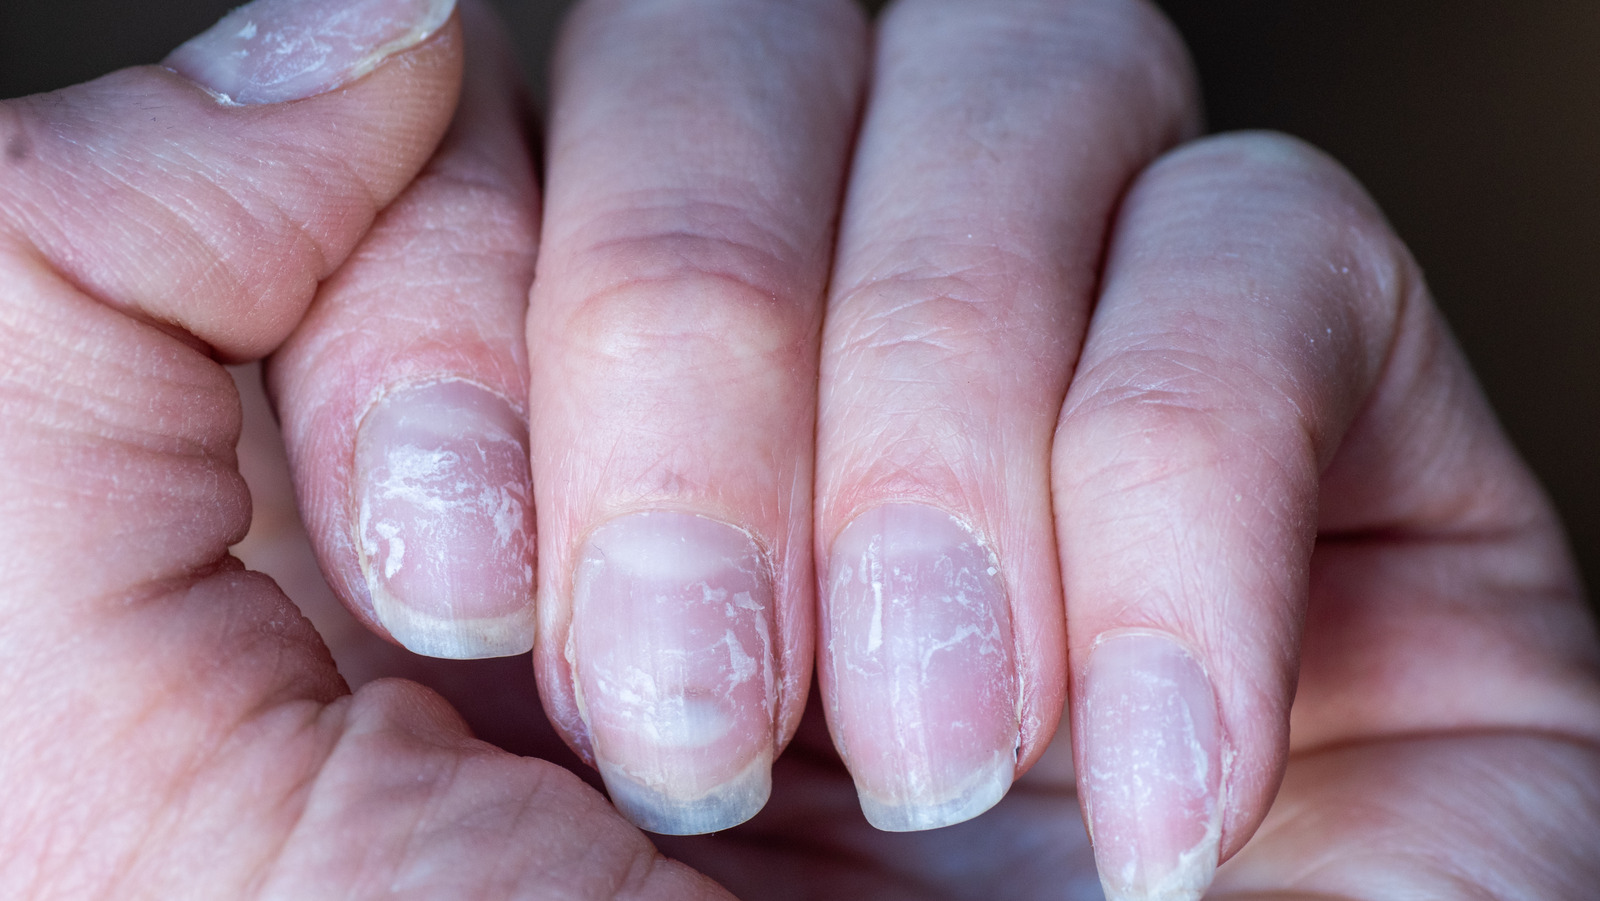 10 Reasons For Brittle Nails - Causes and Treatments for Weak Nails